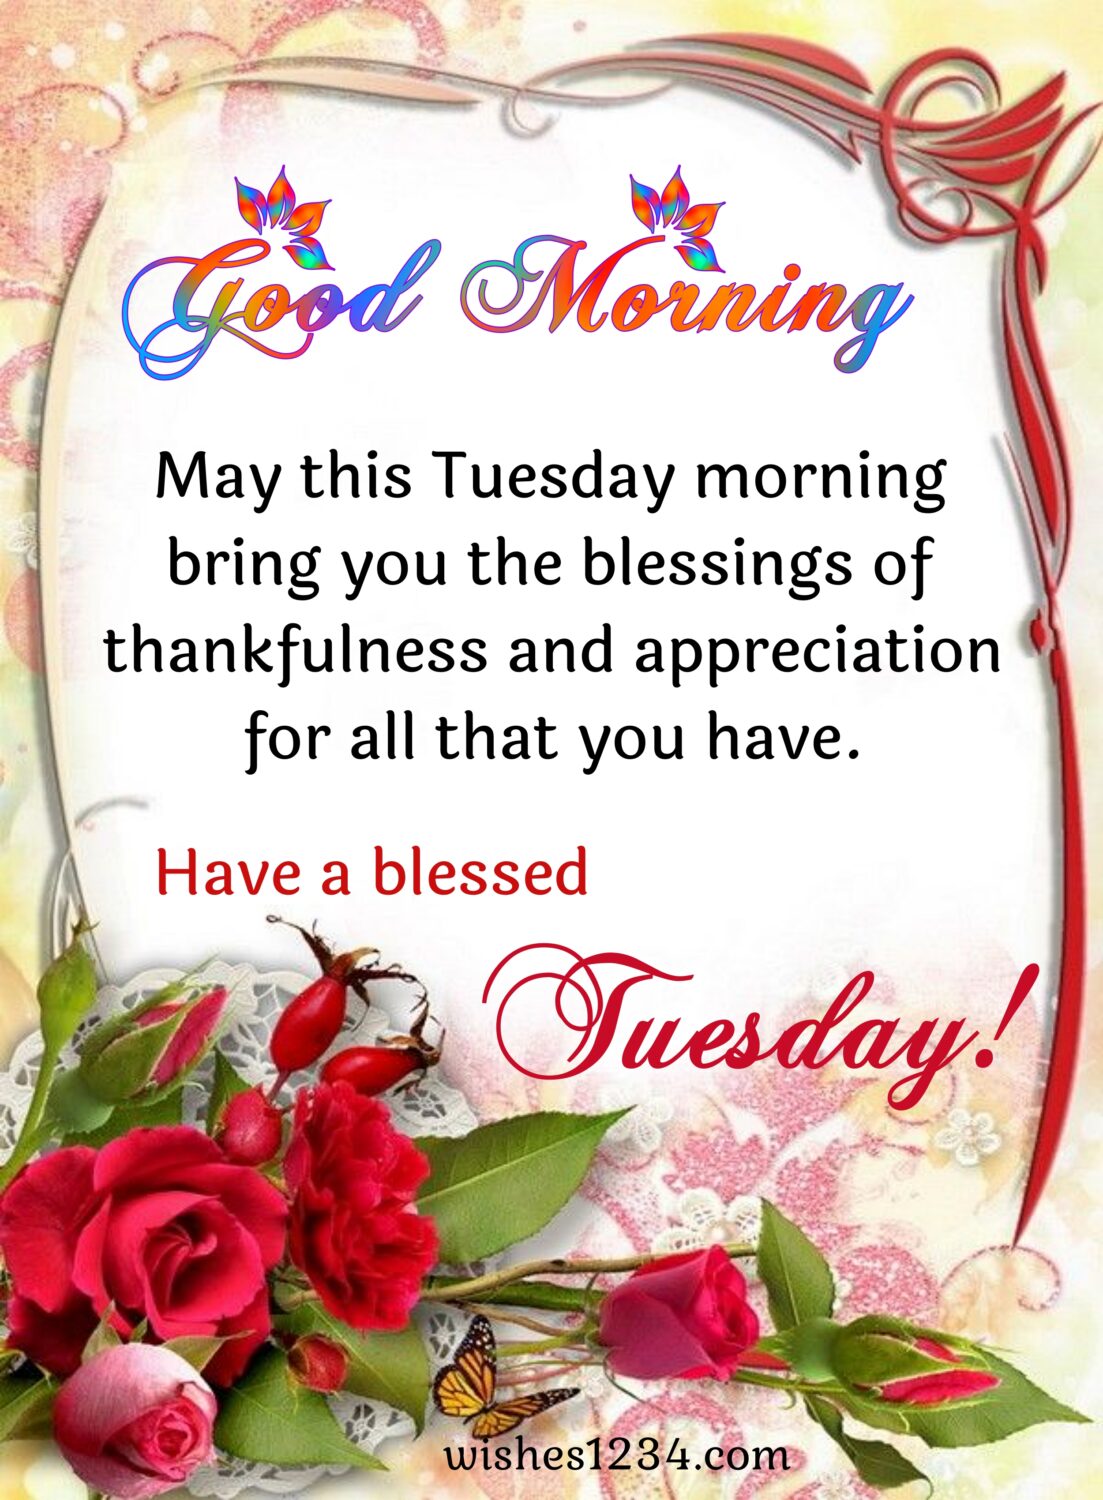 Tuesday blessing with Rose flower border, Good Morning Tuesday.